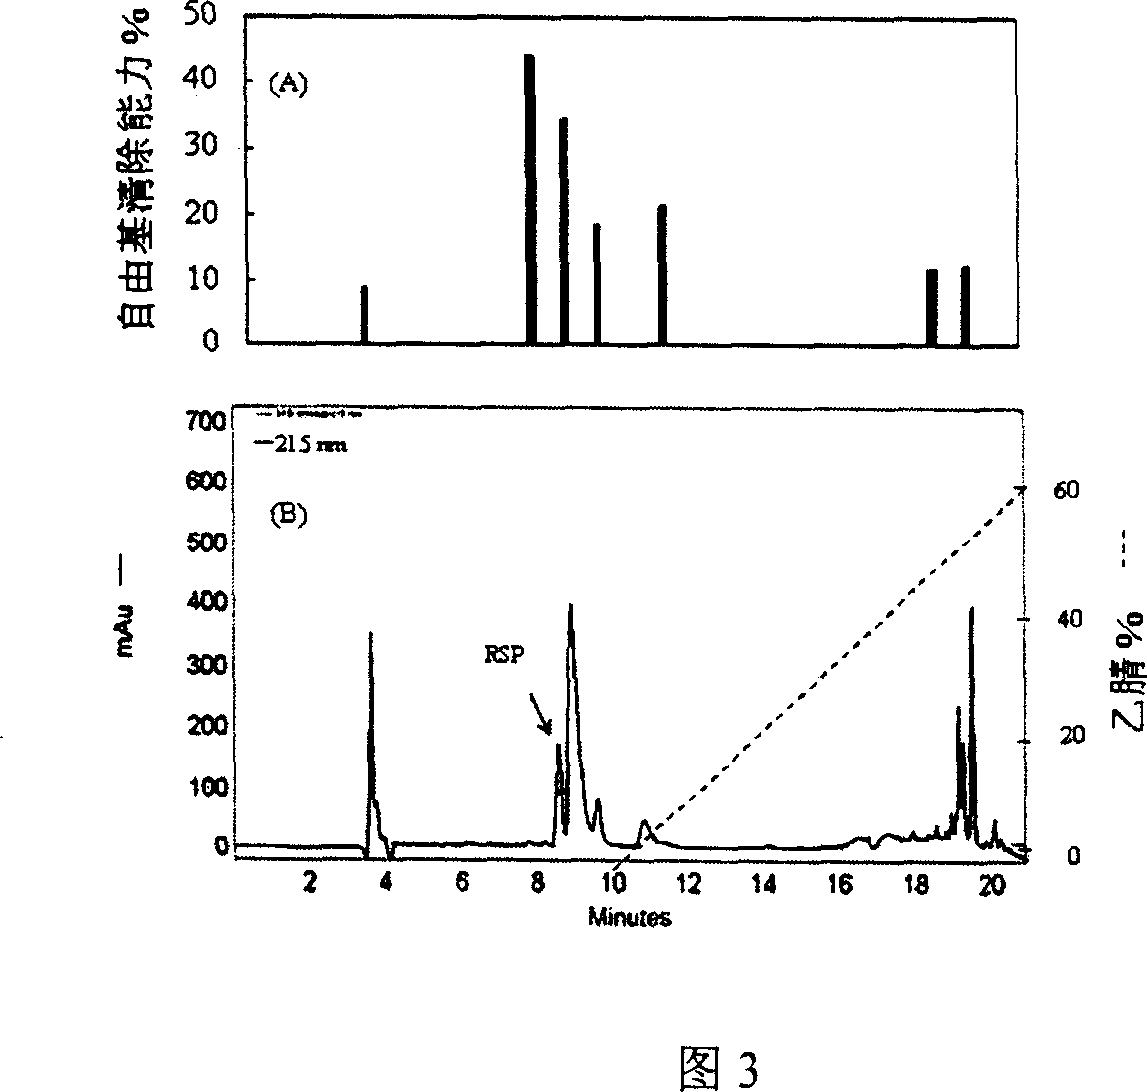 Anti-titanium oxide from collagen and its use